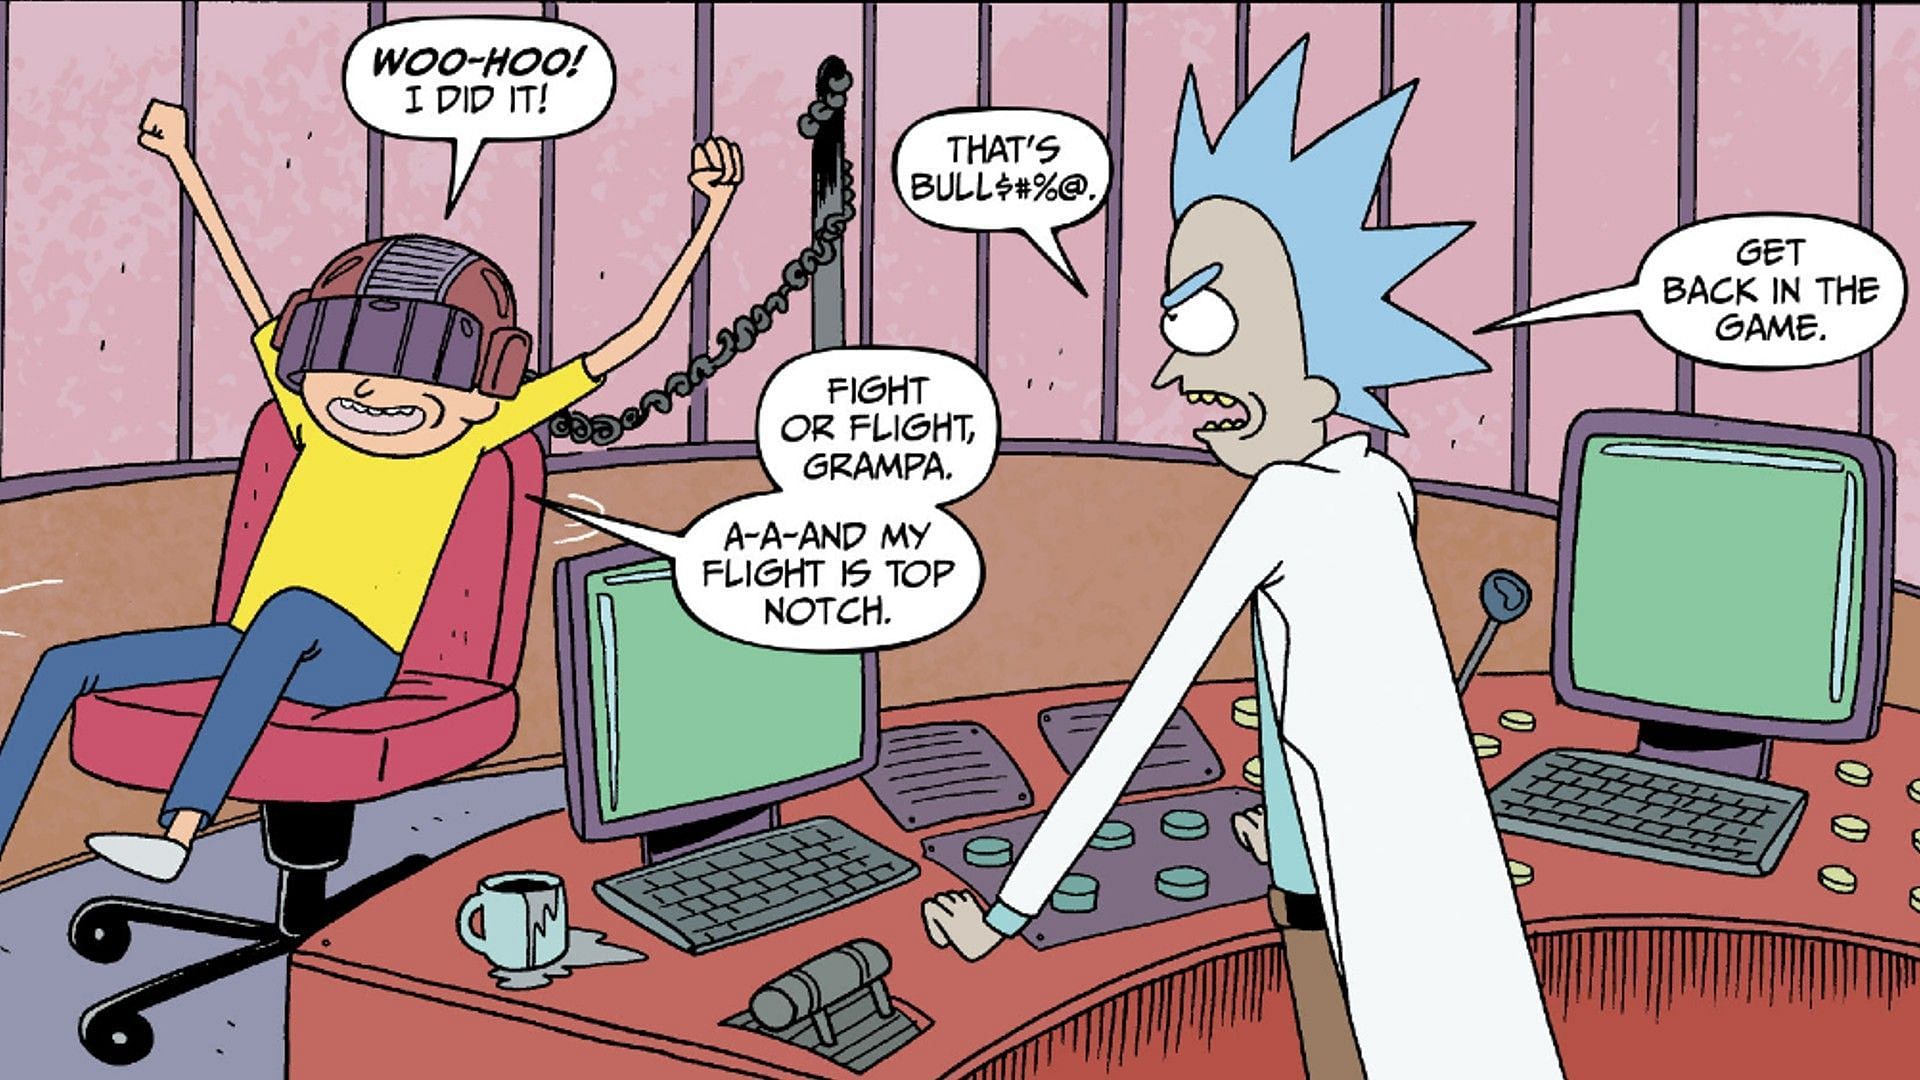 Issue #11 has a secondary story that sees Jerry and Summer switch bodies (Image via Oni Press)